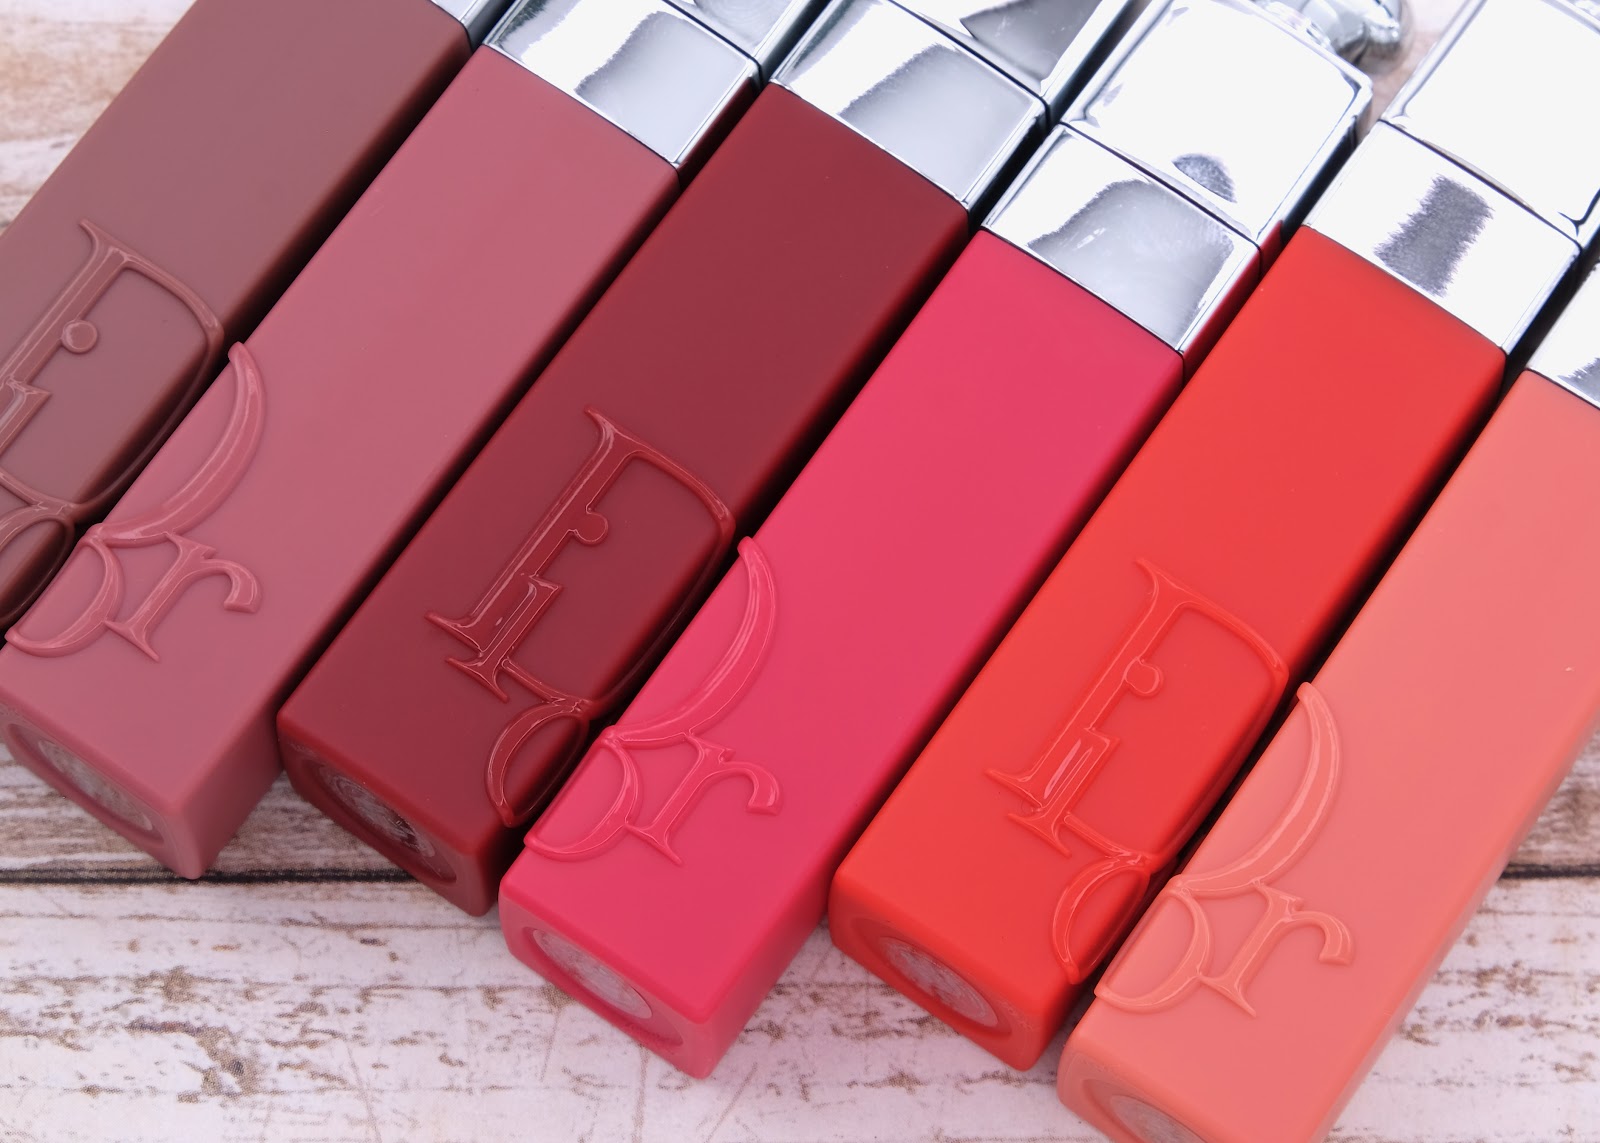 Dior | Summer 2022 Dior Addict Lip Tint: Review and Swatches